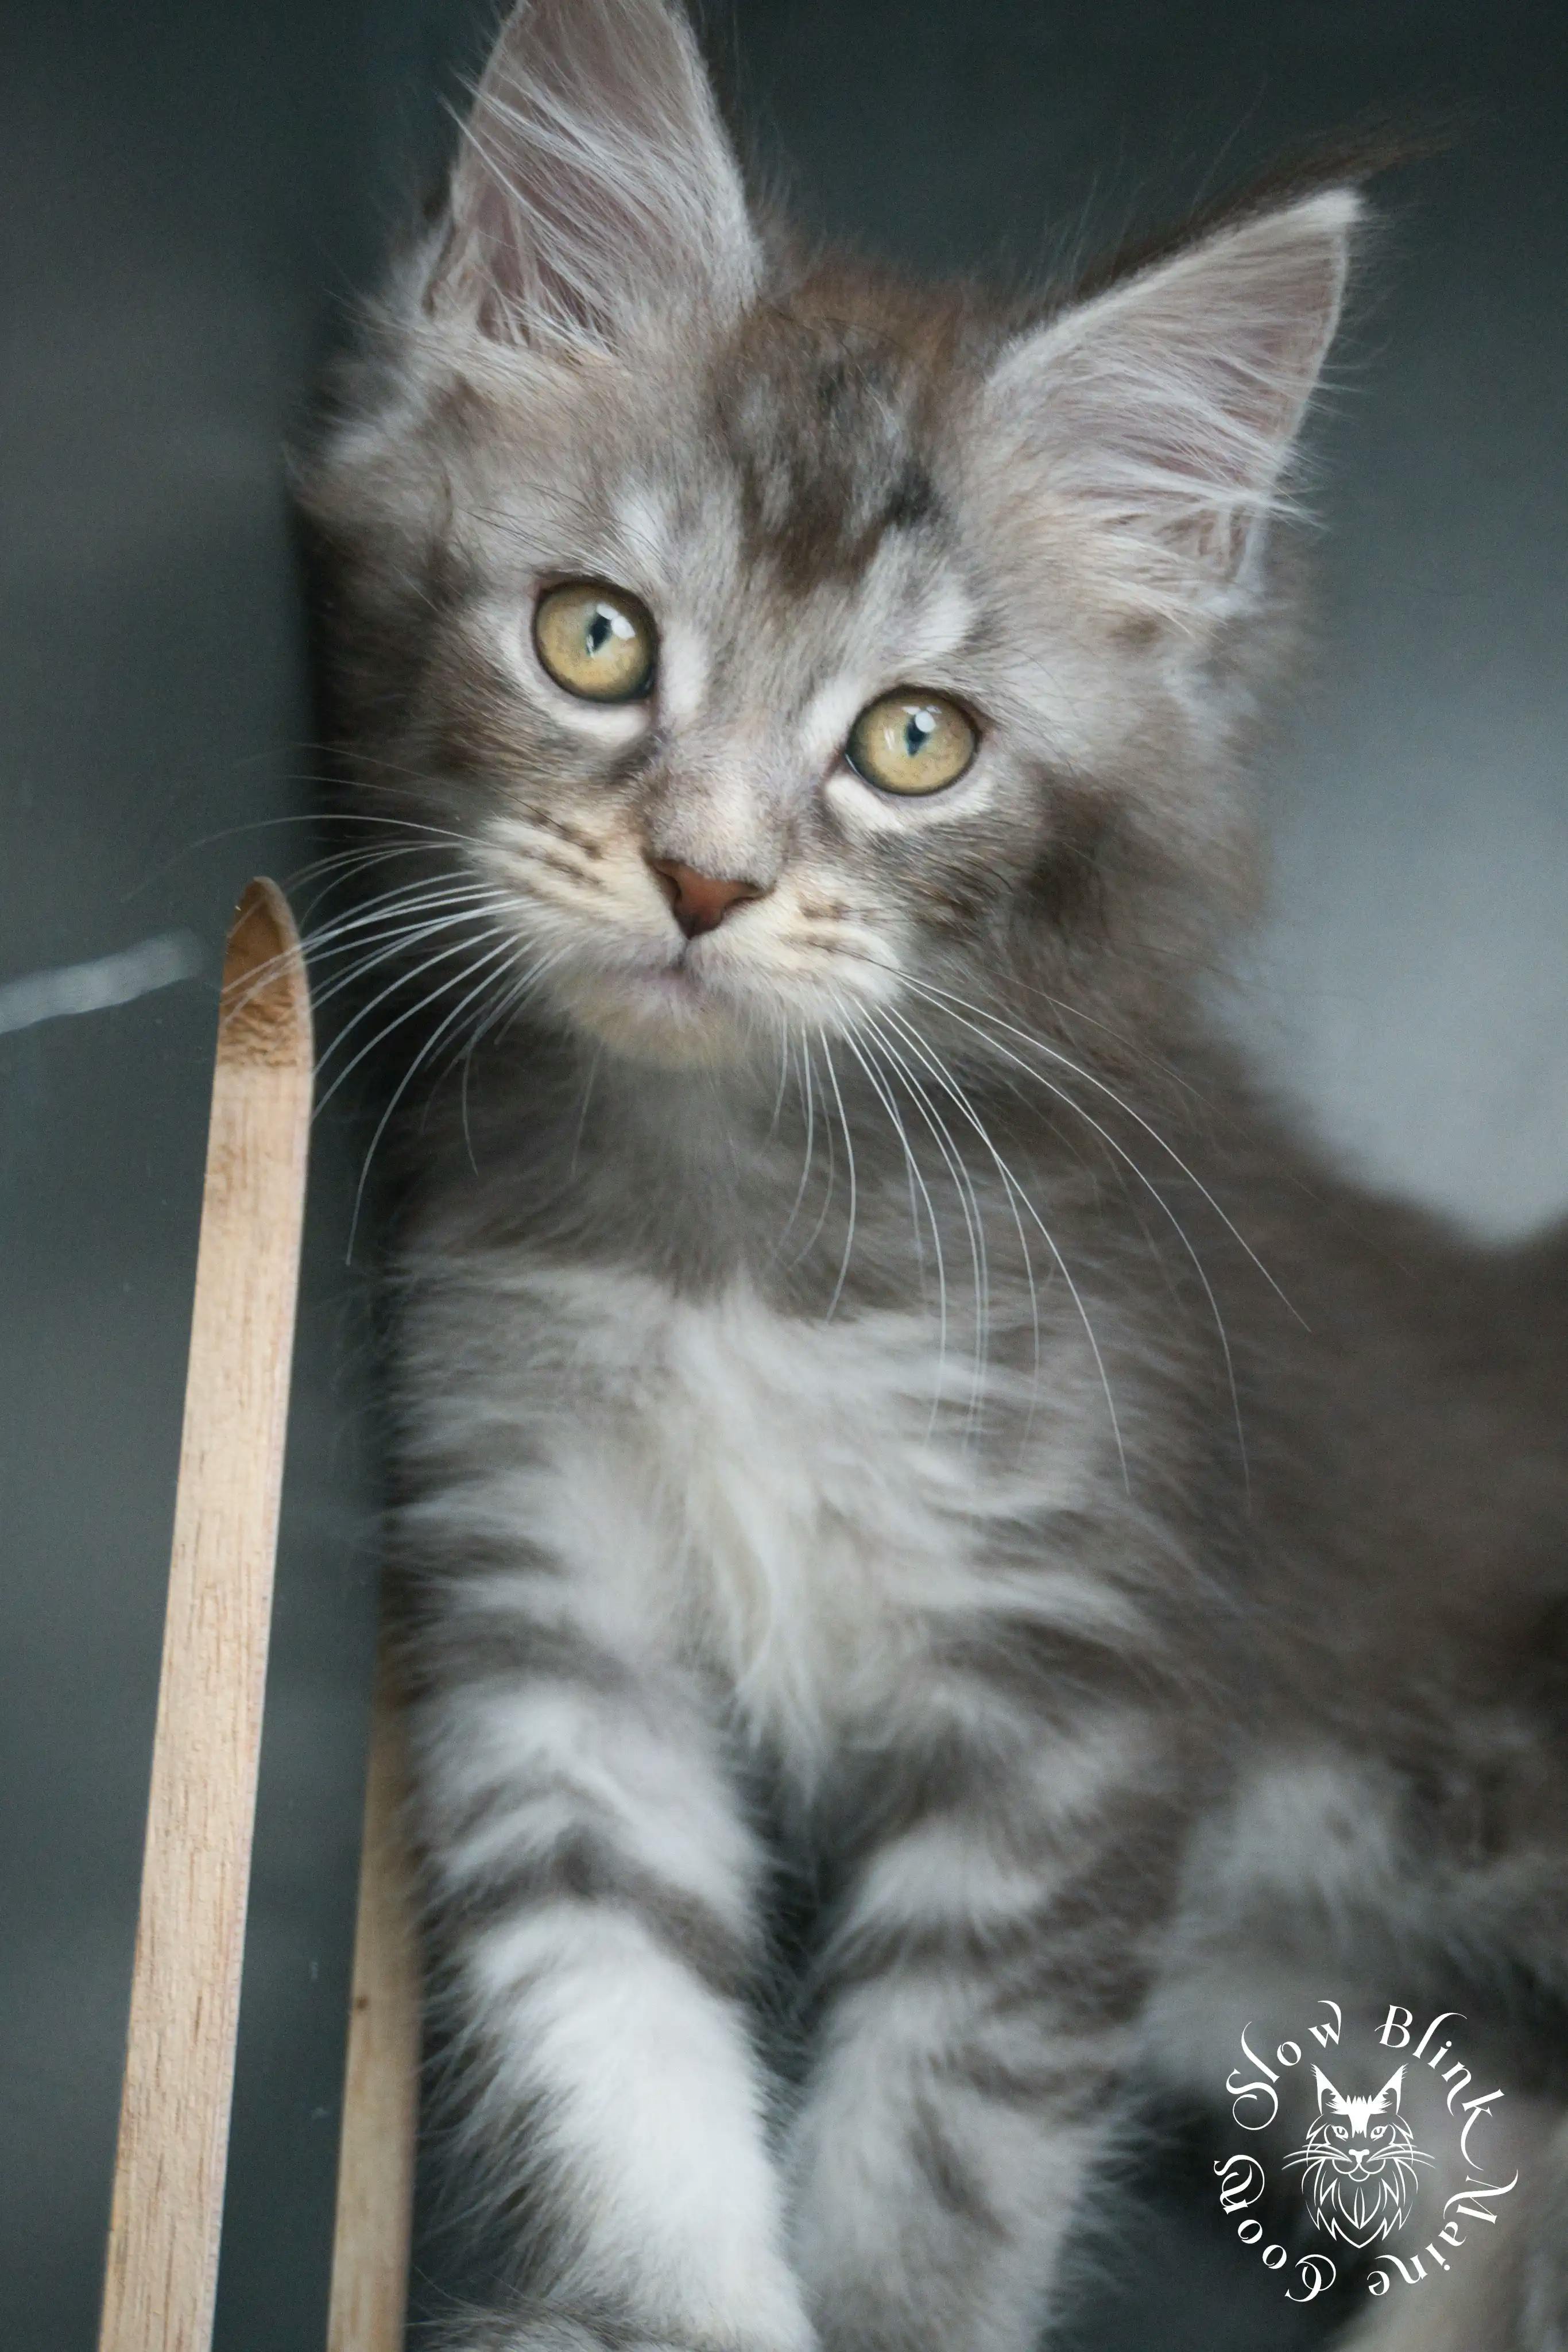 Blue Silver Tabby Maine Coon Kittens > blue silver tabby maine coon kitten | slowblinkmainecoons | 434